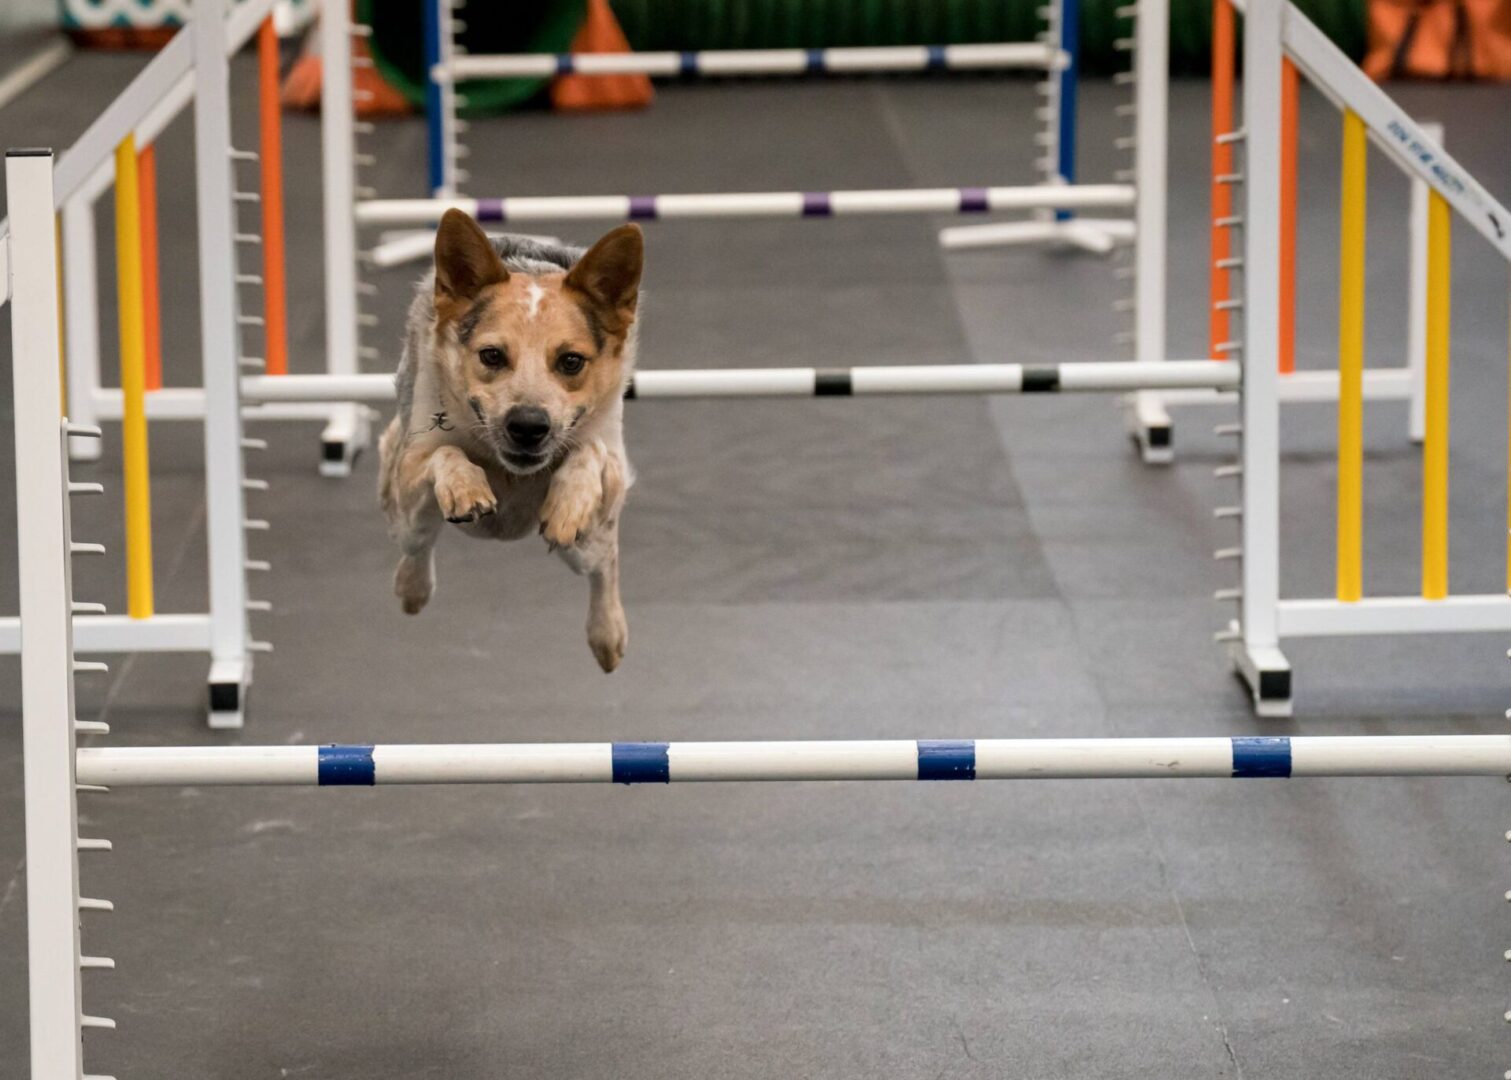 A dog jumping over an obstacle in an indoor arena.